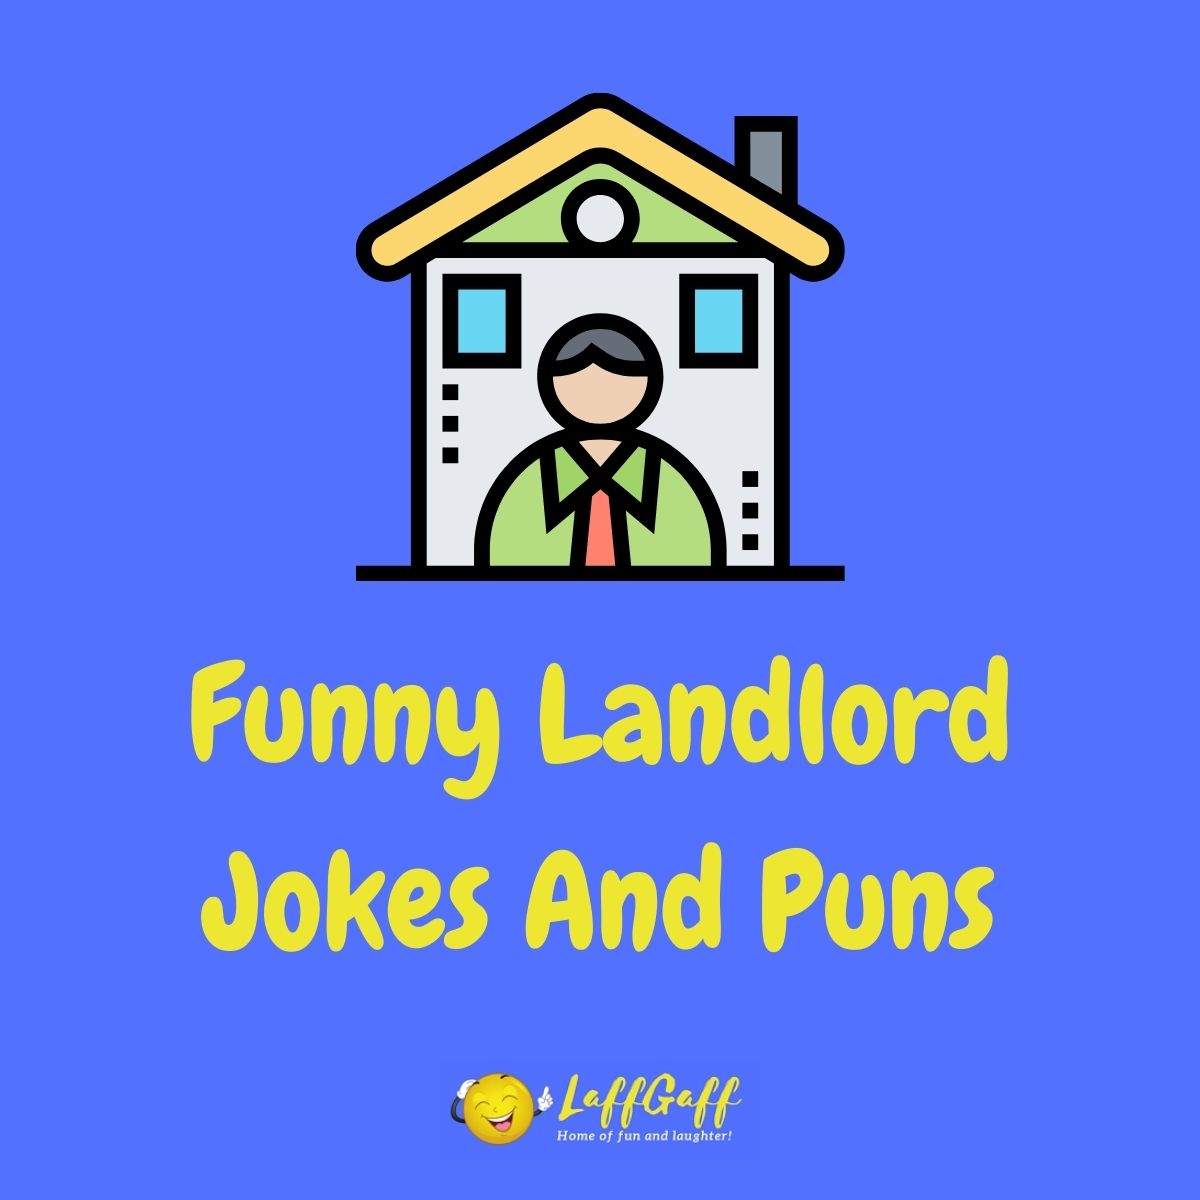 Featured image for a page of funny landlord jokes and puns.